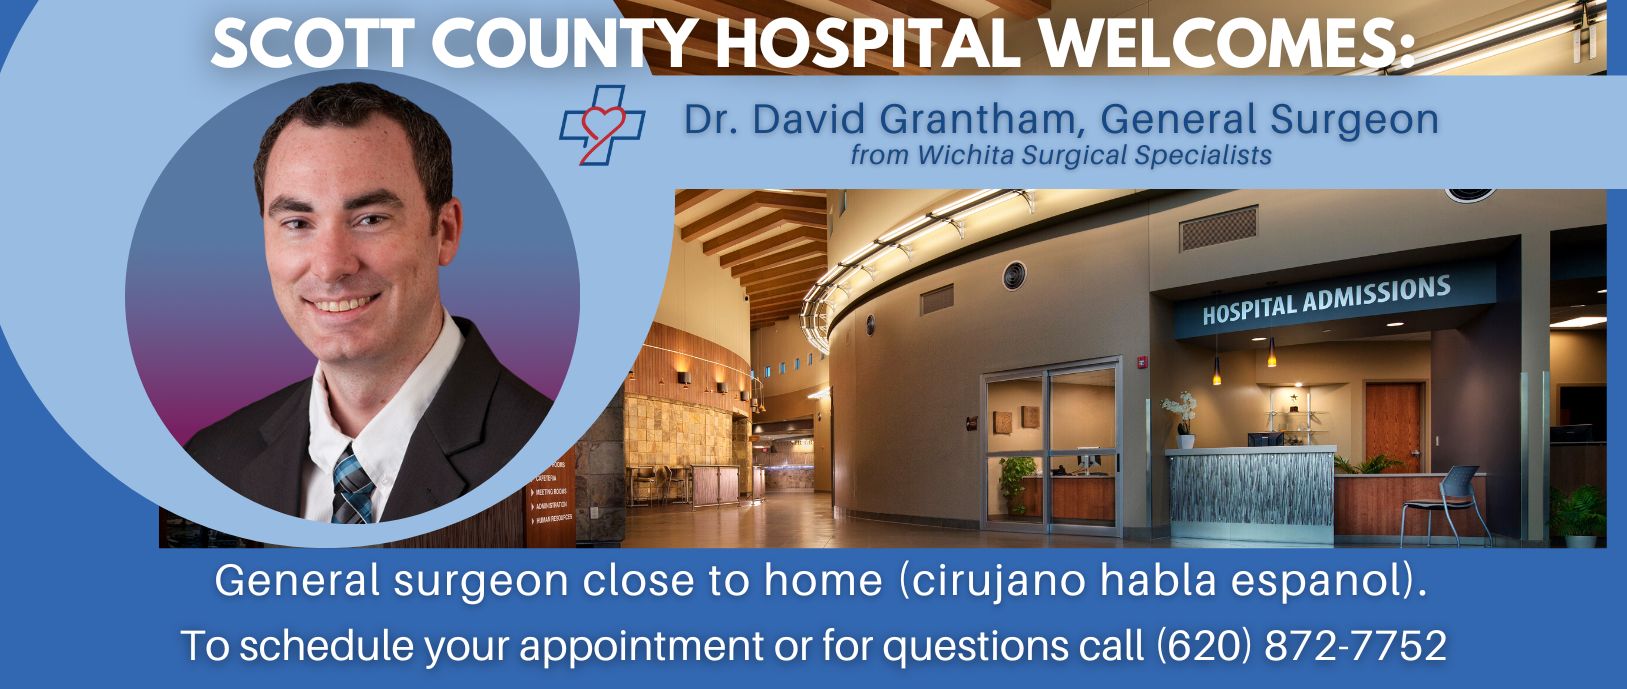 Scott County Hospital Welcomes: Dr. David C. Grantham, General Surgeon from Wichita Surgical Specialists

General Surgeon close to home (cirujano nabla espanol).
To Schedule your appointment or for questions, call (620) 872-7752

To schedule your appointment or for questions call (620-872-7752).